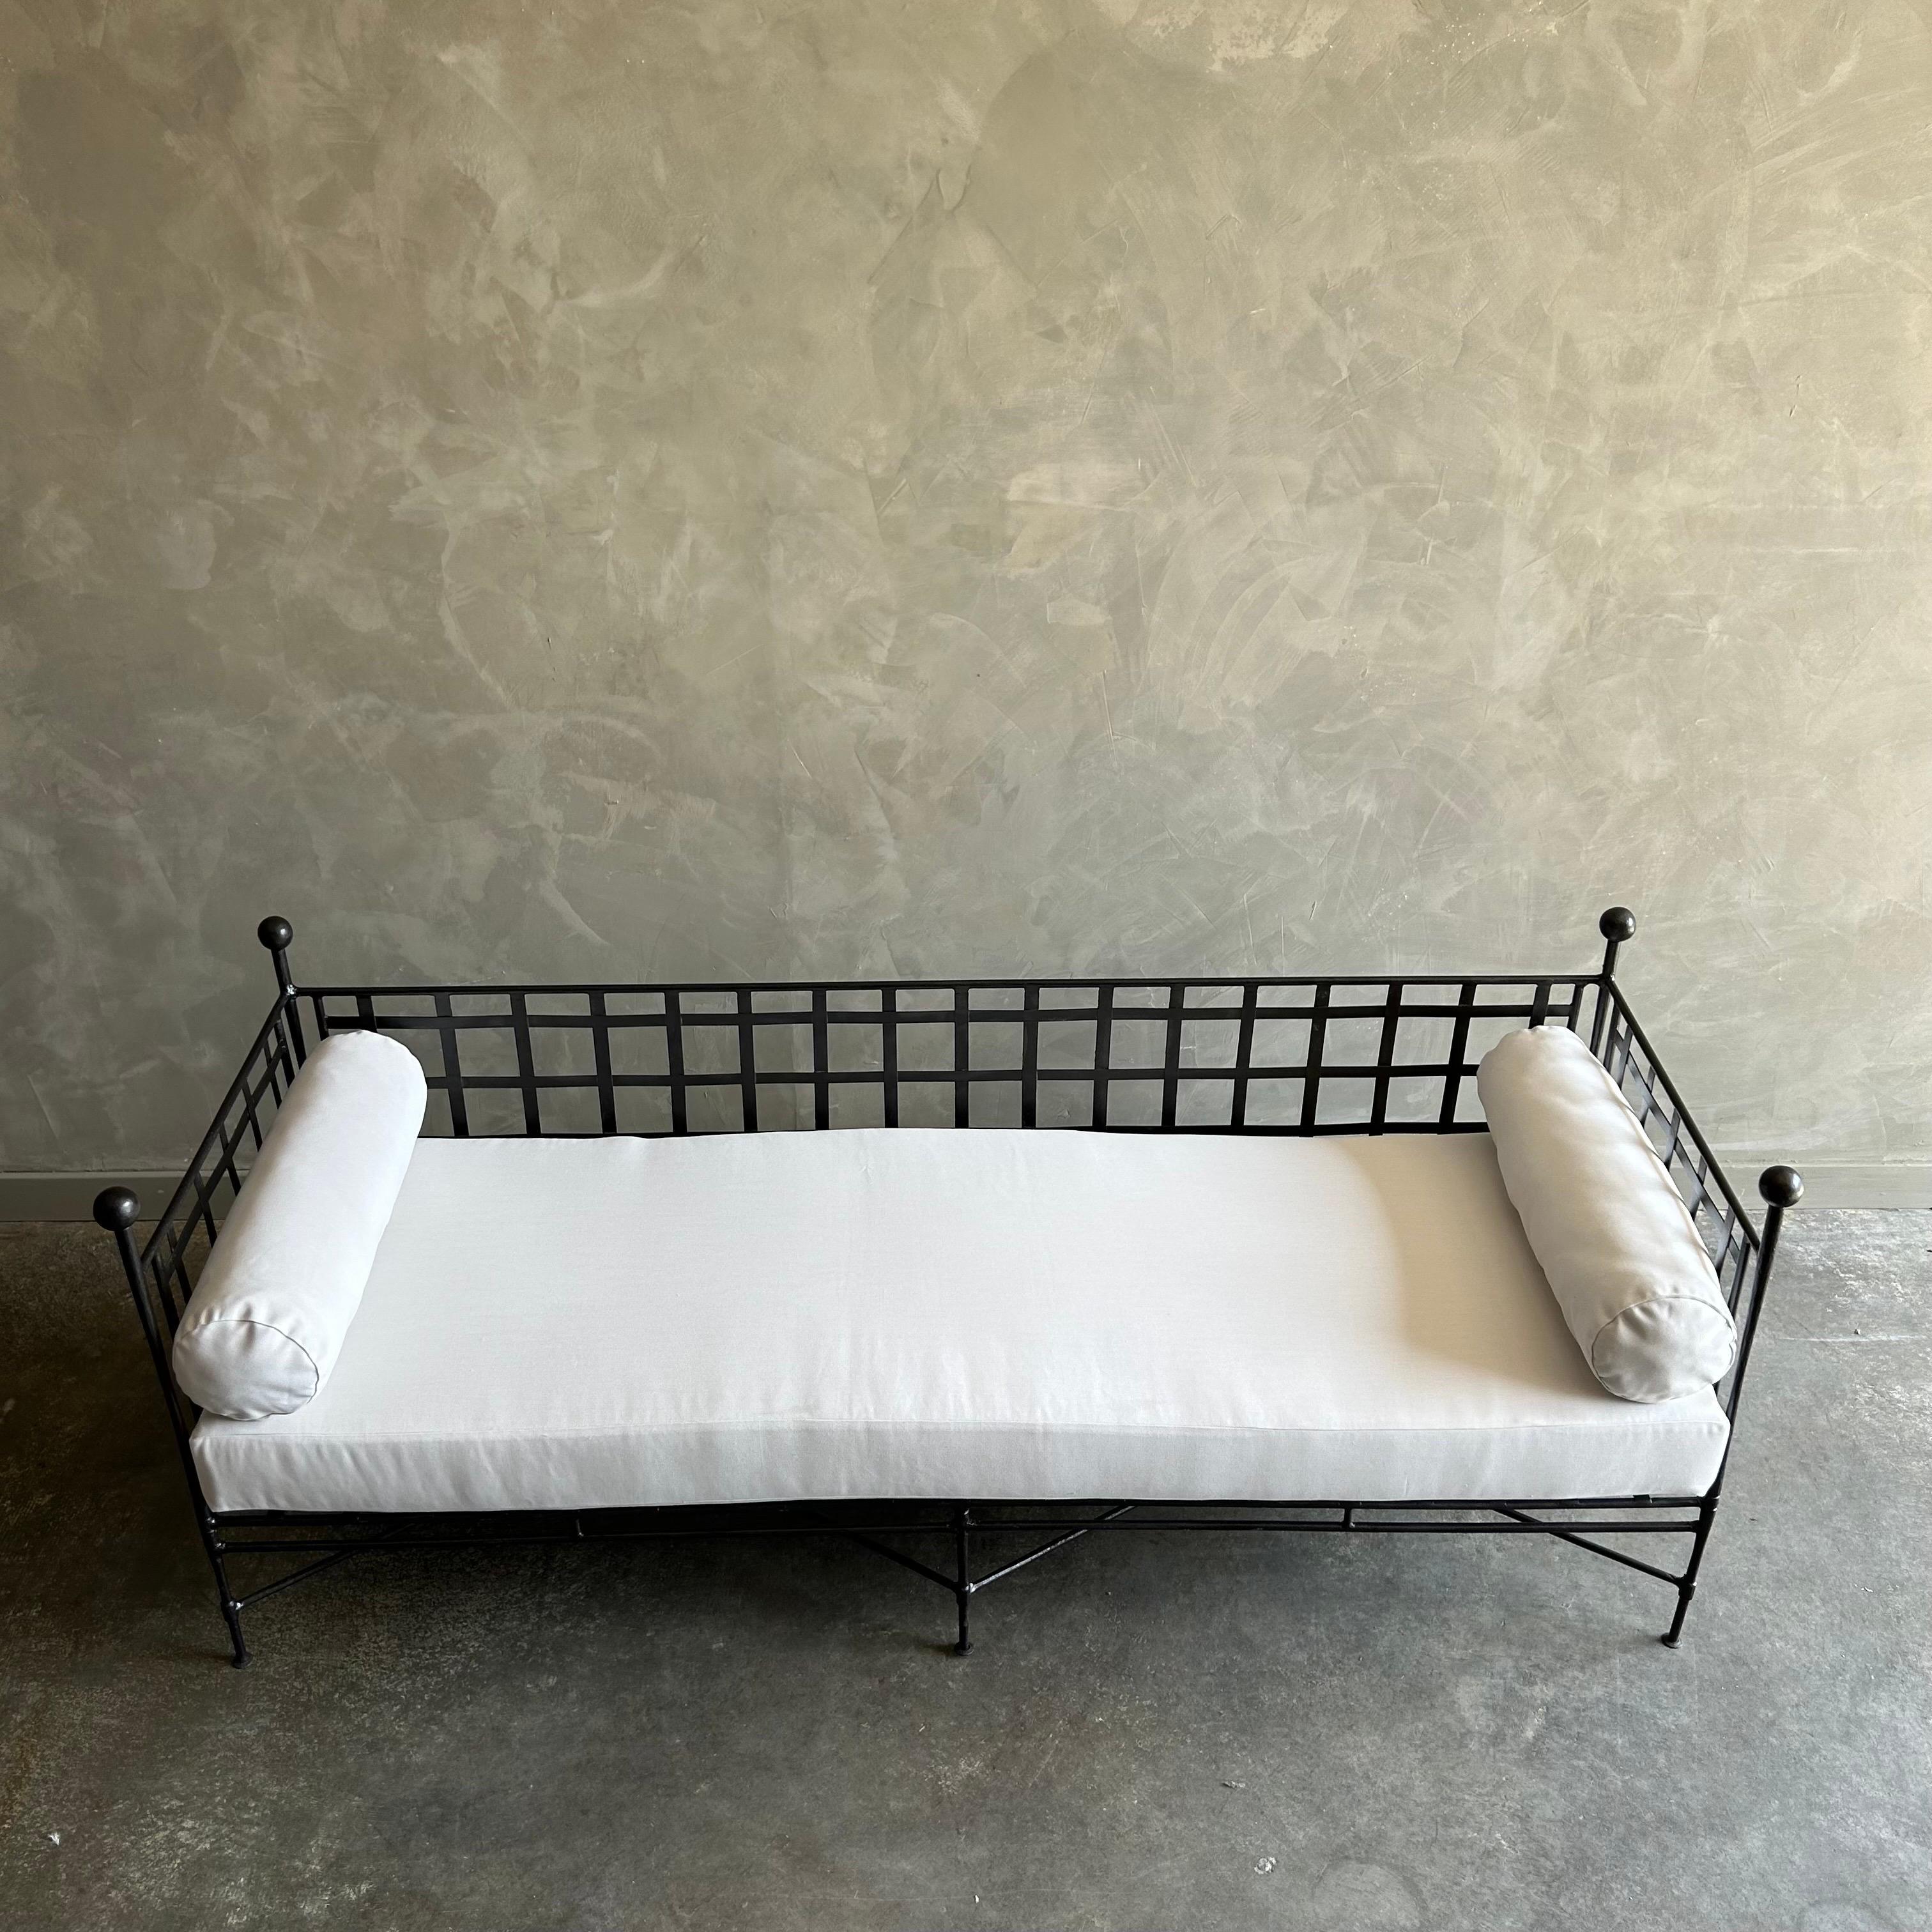 American Custom Made to Order Outdoor or Indoor Iron Sofa with Cushion For Sale